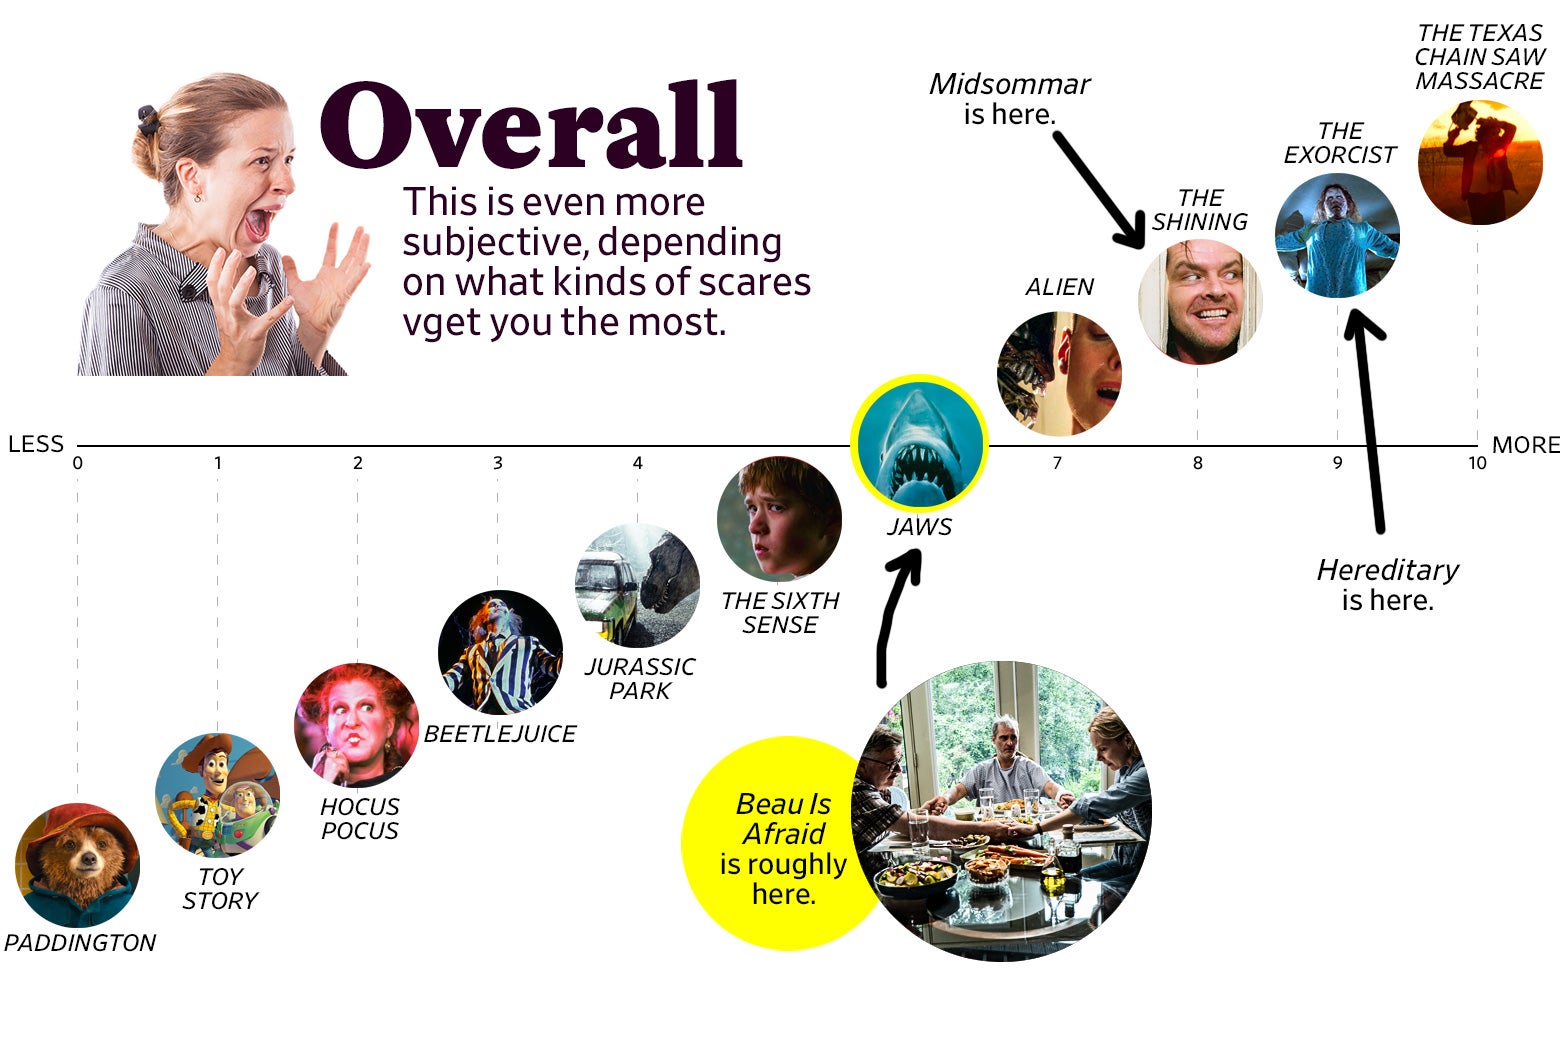 A chart titled “Overall: This is even more subjective, depending on what kinds of scares get you the most” shows that Beau Is Afraid ranks a 6, roughly the same as Jaws. Midsommar ranked as a 7 overall, roughly the same as Alien, whereas Hereditary scored an 8, roughly the same as The Shining. The scale ranges from Paddington (0) to the original Texas Chain Saw Massacre (10).